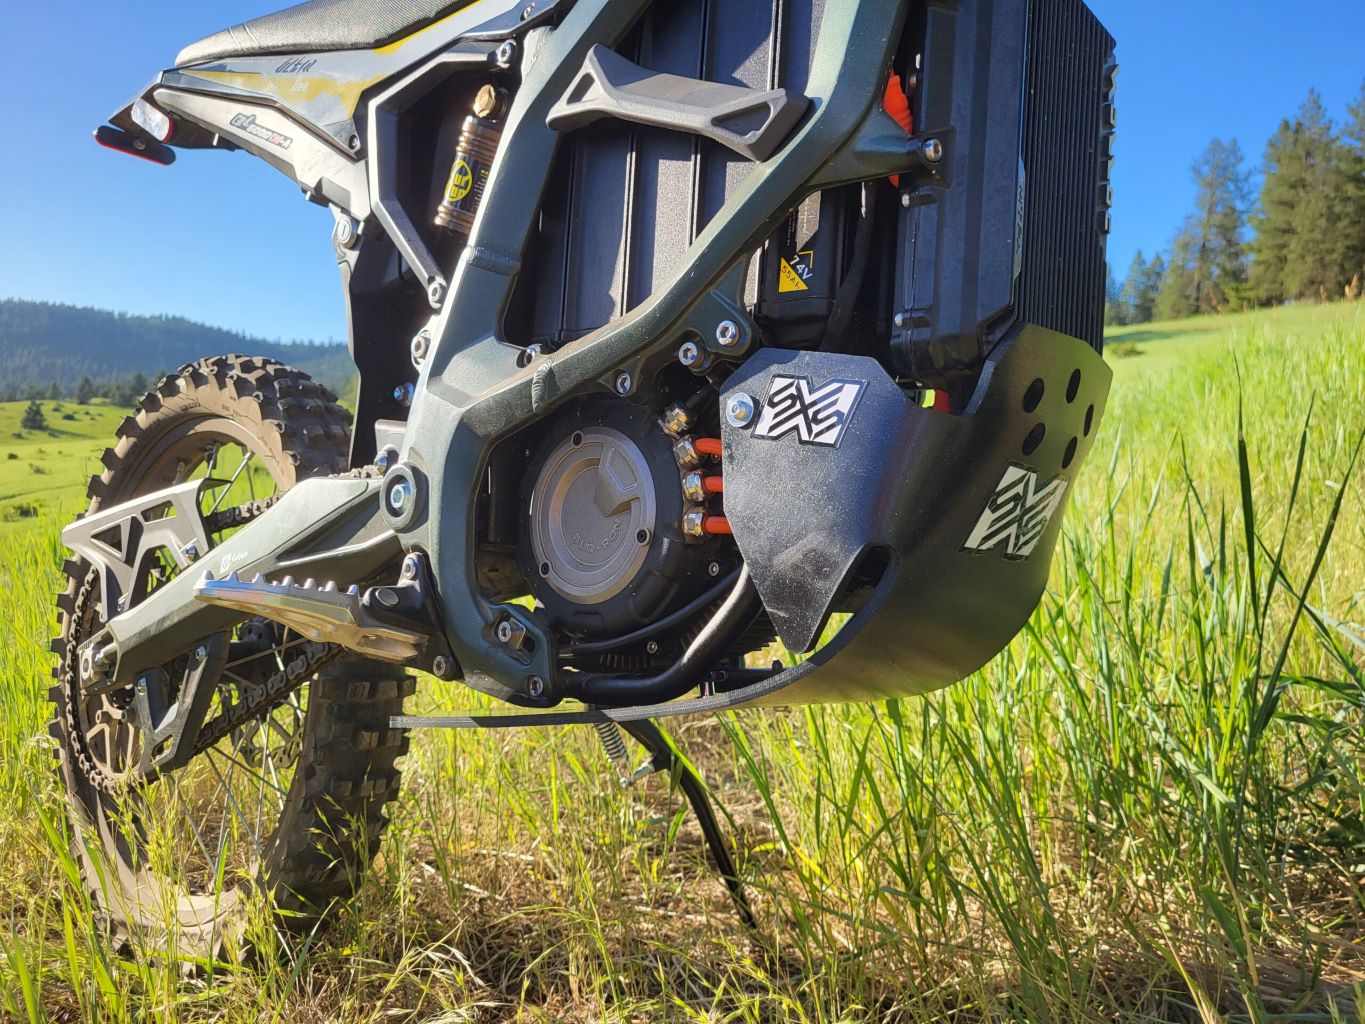 UHMW Skid plate by SXS for Surron Talaria